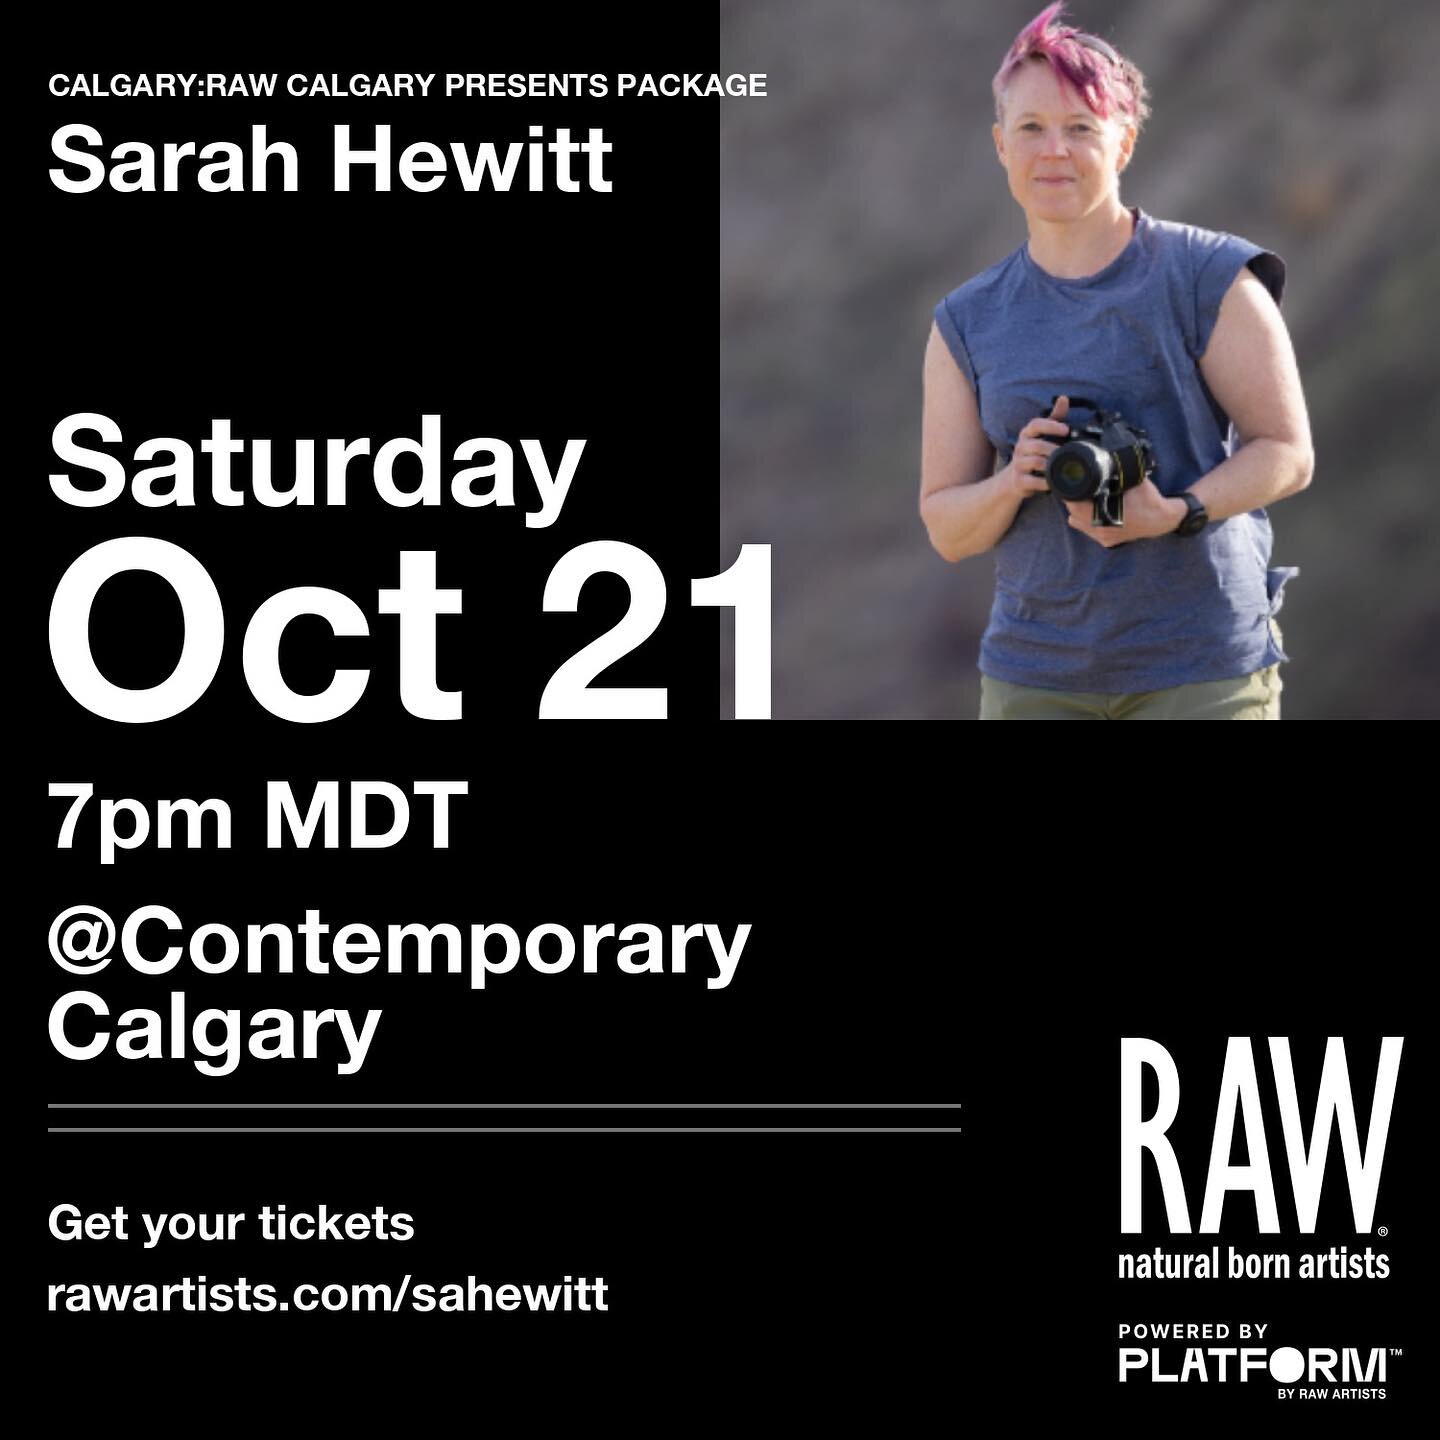 In case anyone is on the fence about checking out this show, you can still buy tickets from me to support the event! It&rsquo;s on Saturday, October 21 from 7 PM to midnight at Contemporary Calgary. For anyone who wants to check out local artists, th